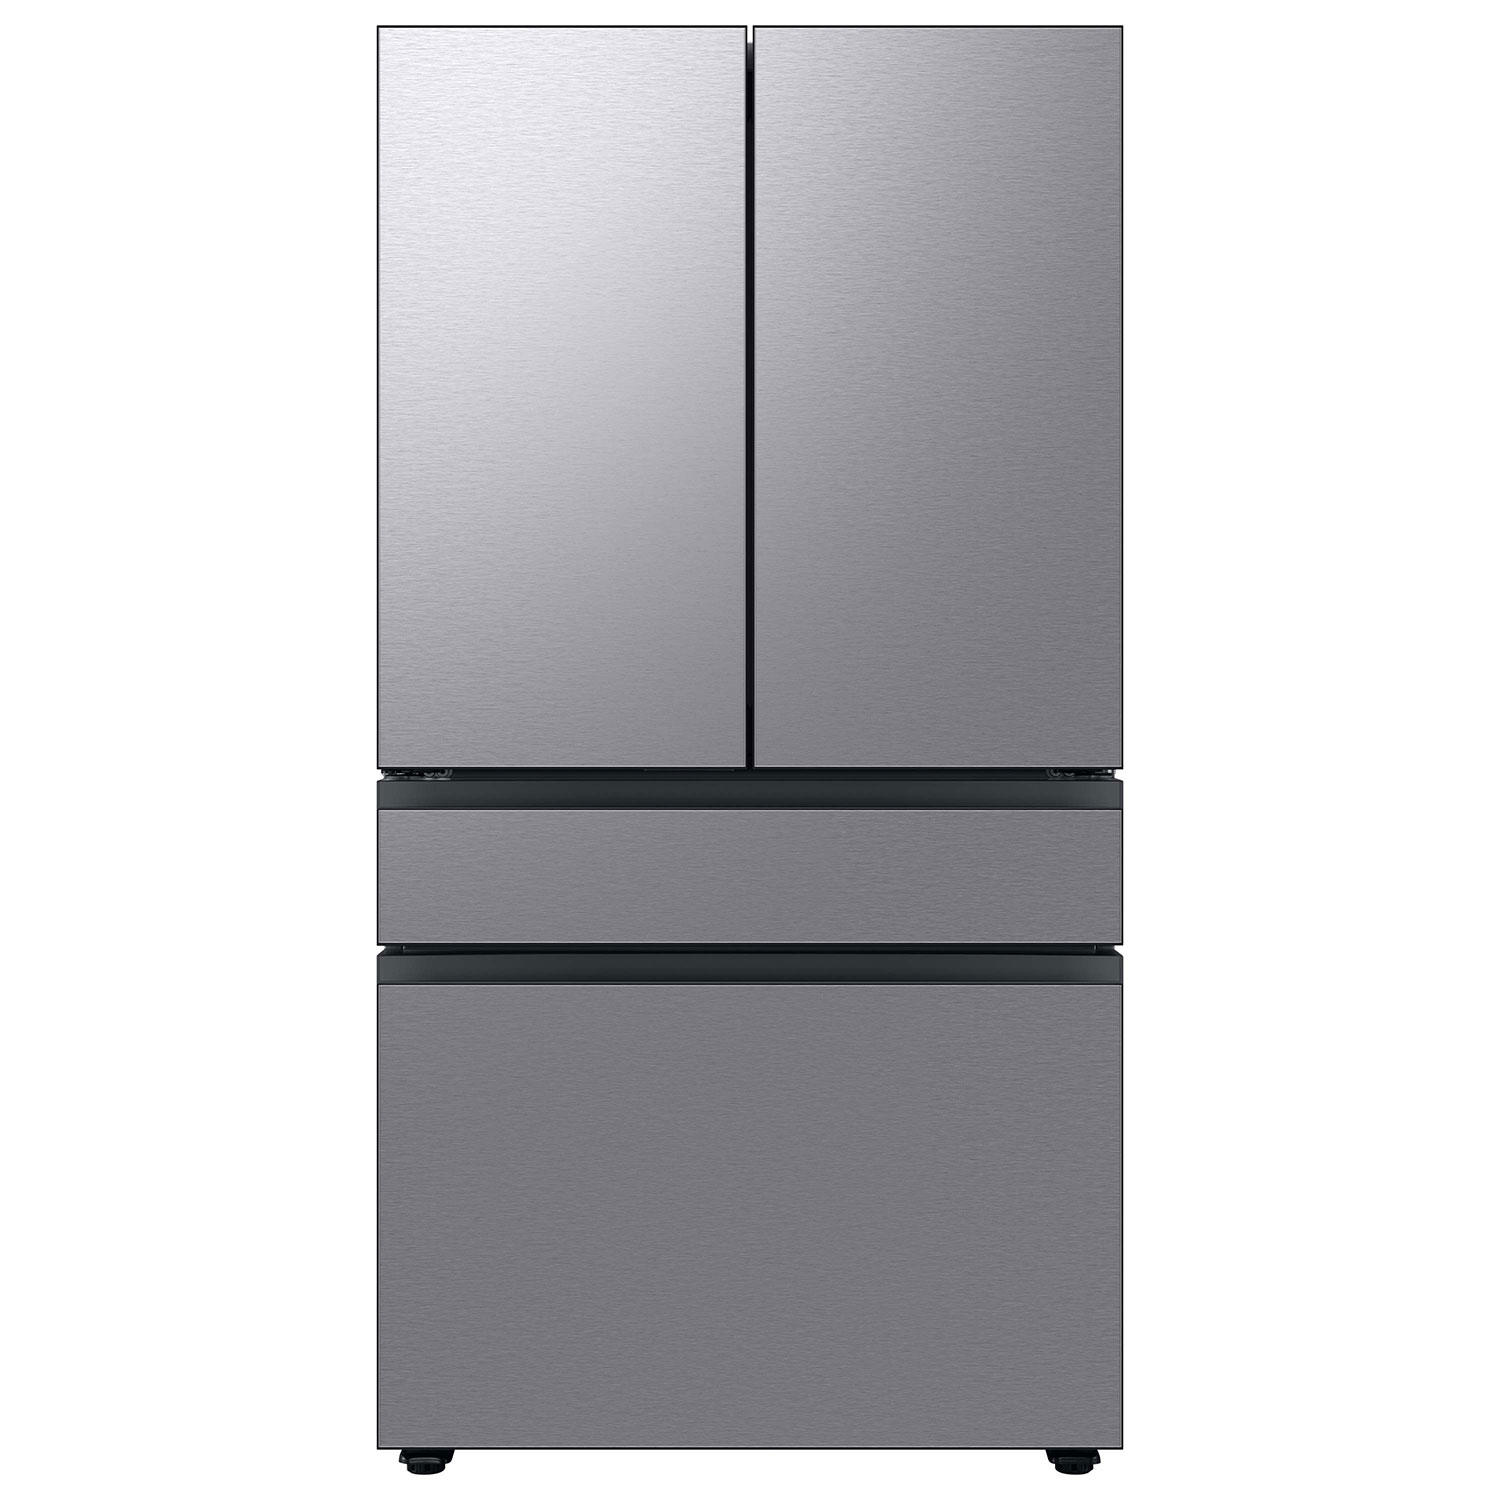 Samsung 23 cu. ft. Smart BESPOKE 4-Door French-Door Refrigerator with Customizable Panel Colors and AutoFill Water